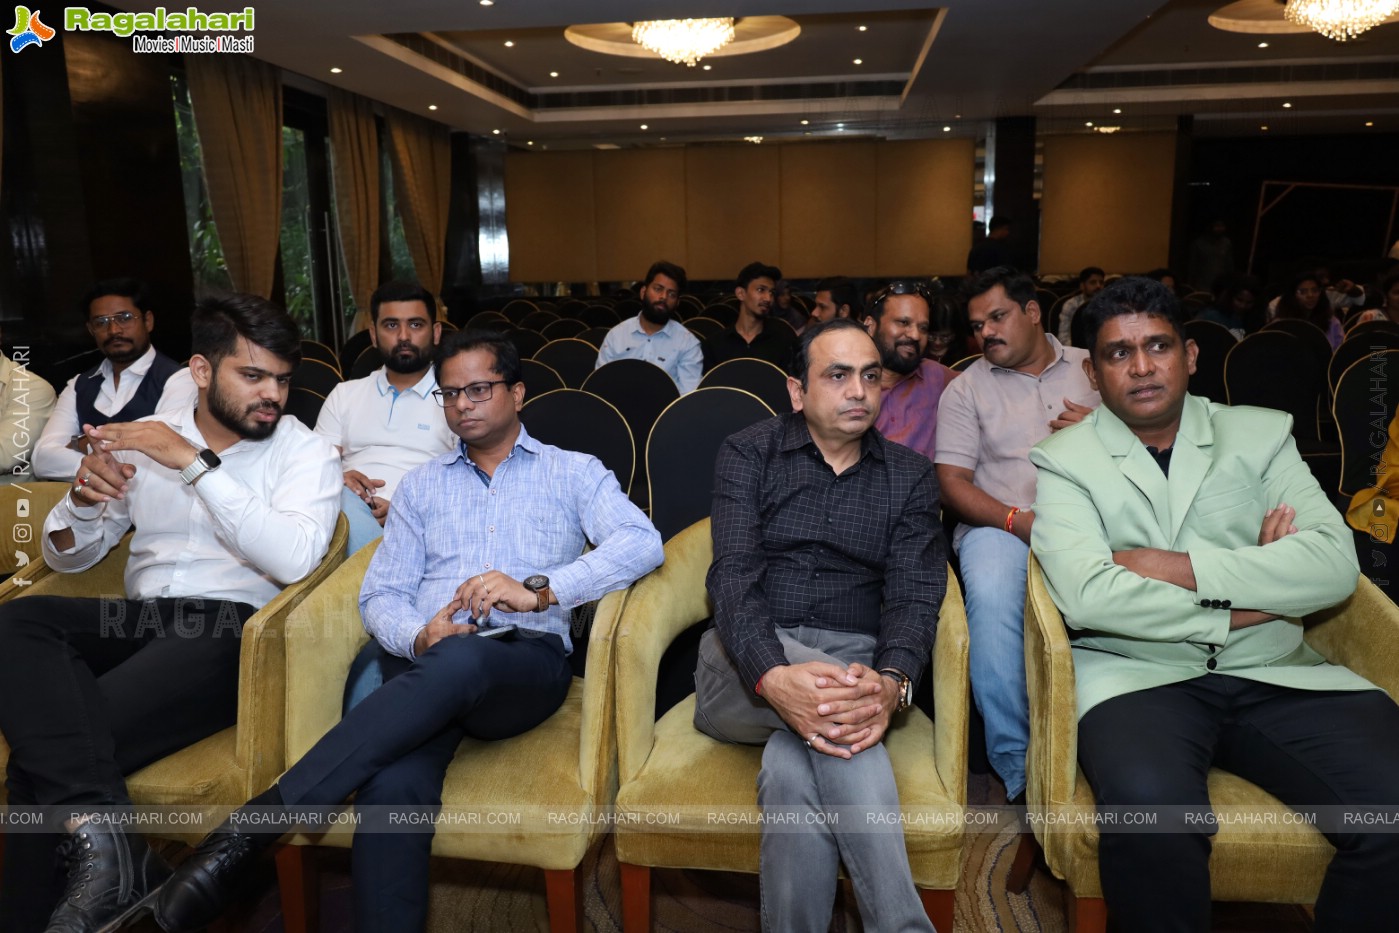 Beautech Cosmetic and Salon Expo Event Poster Launch, Hyderabad 